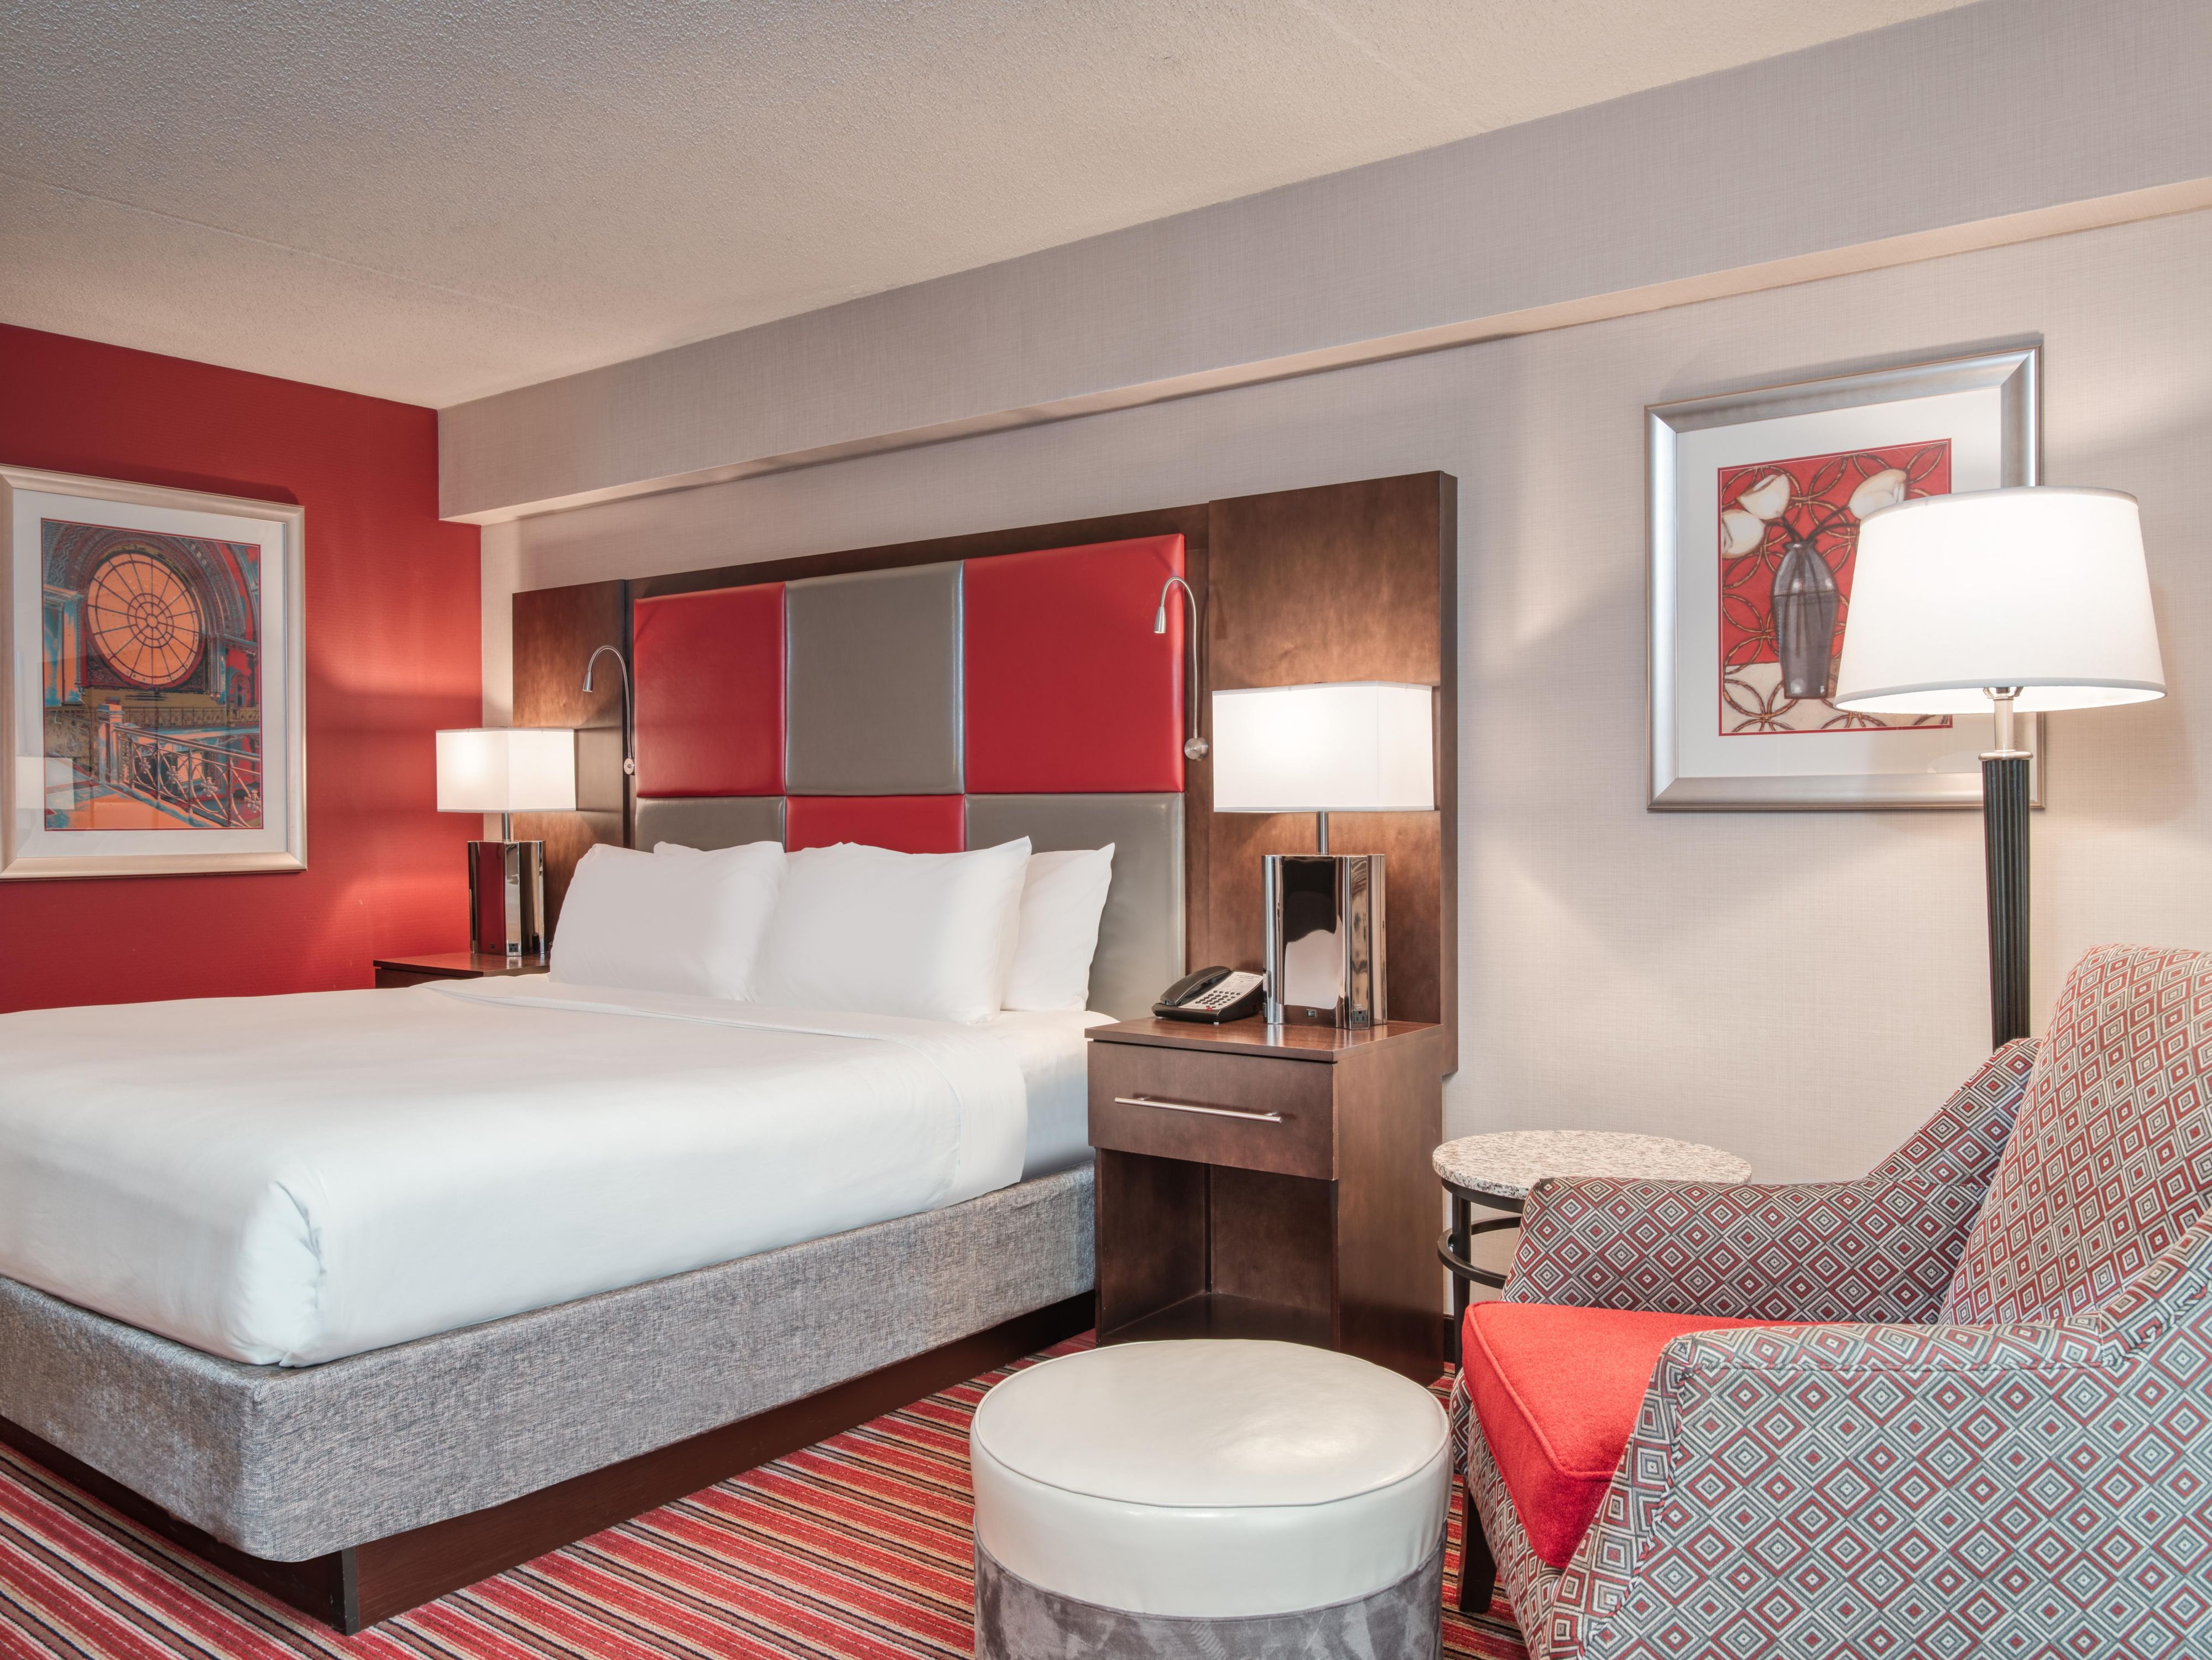 Make yourself at home in our queen guest rooms. 